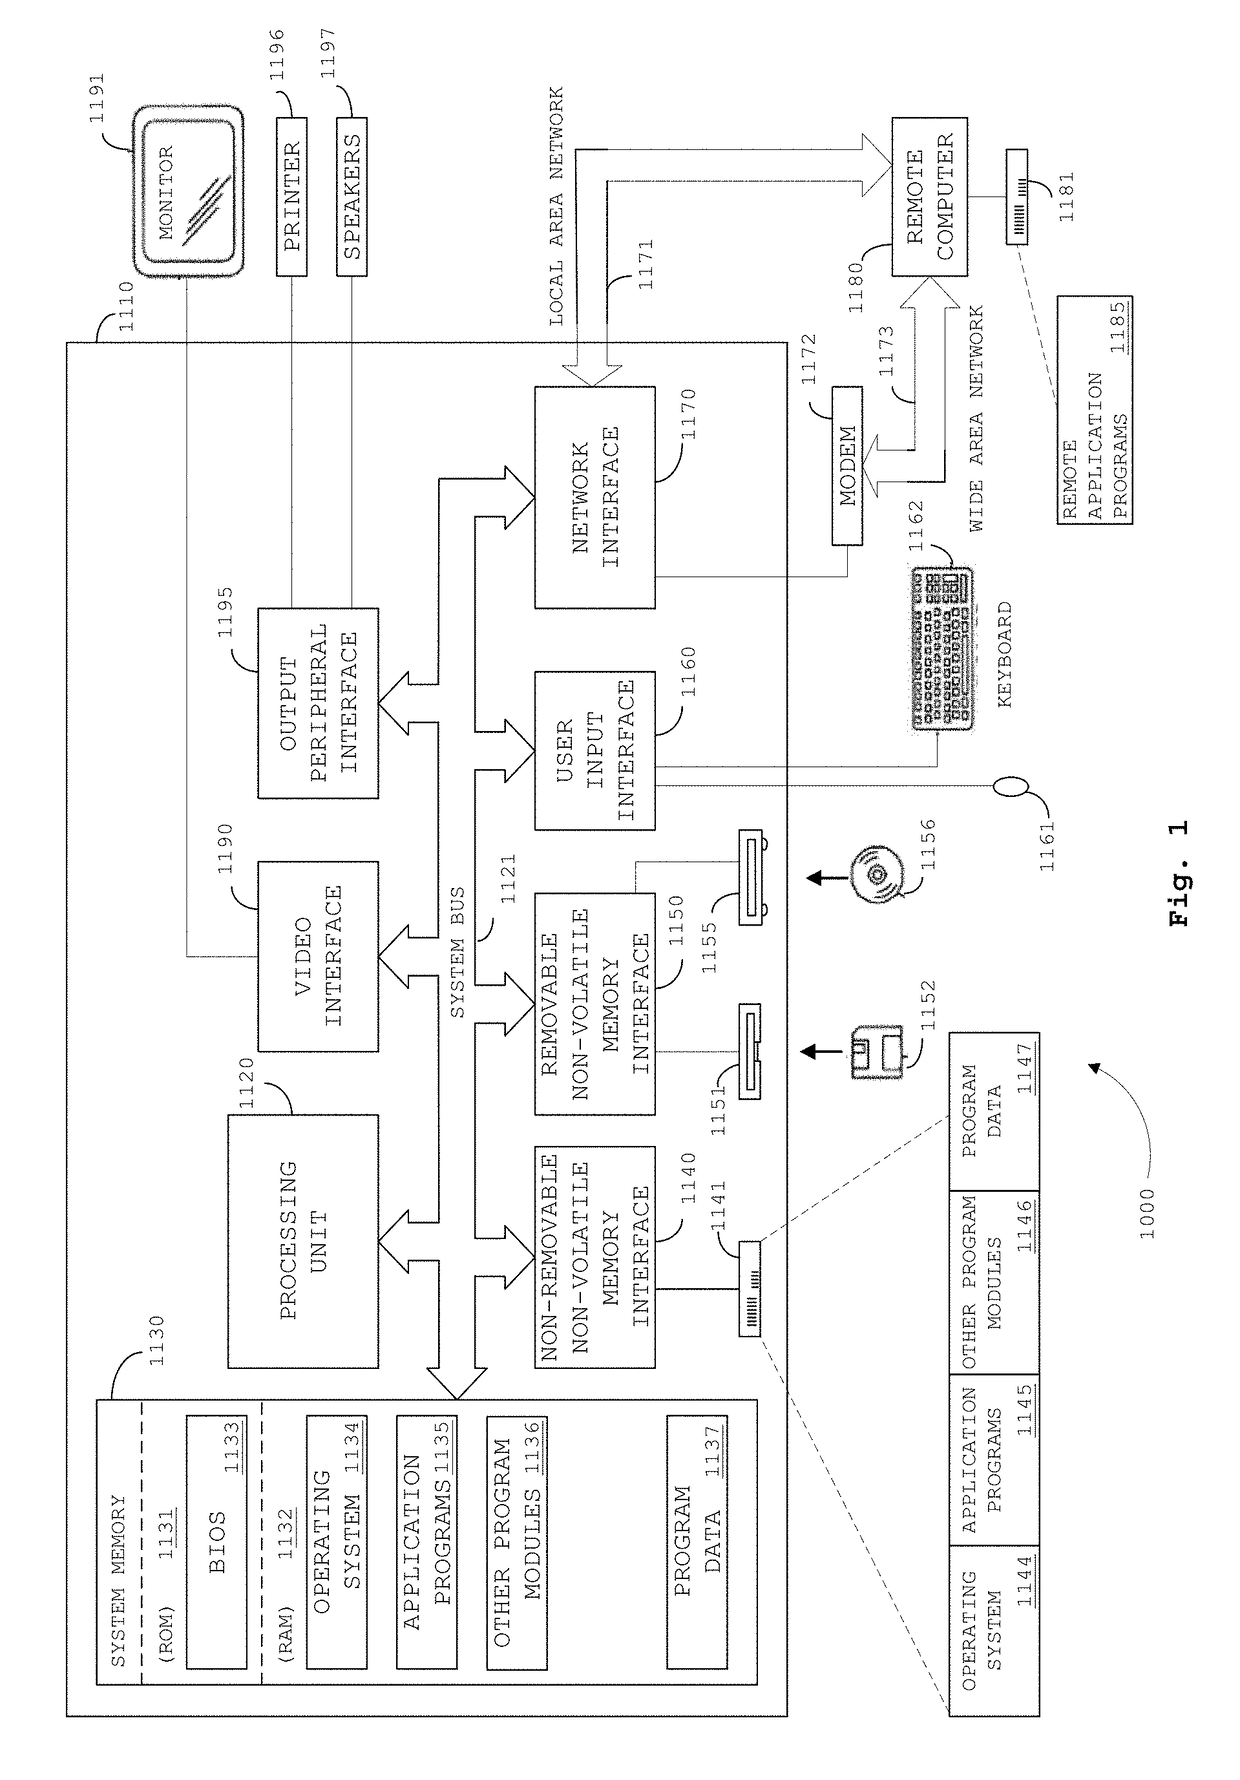 Apparatus and method for generating inspection report(s)